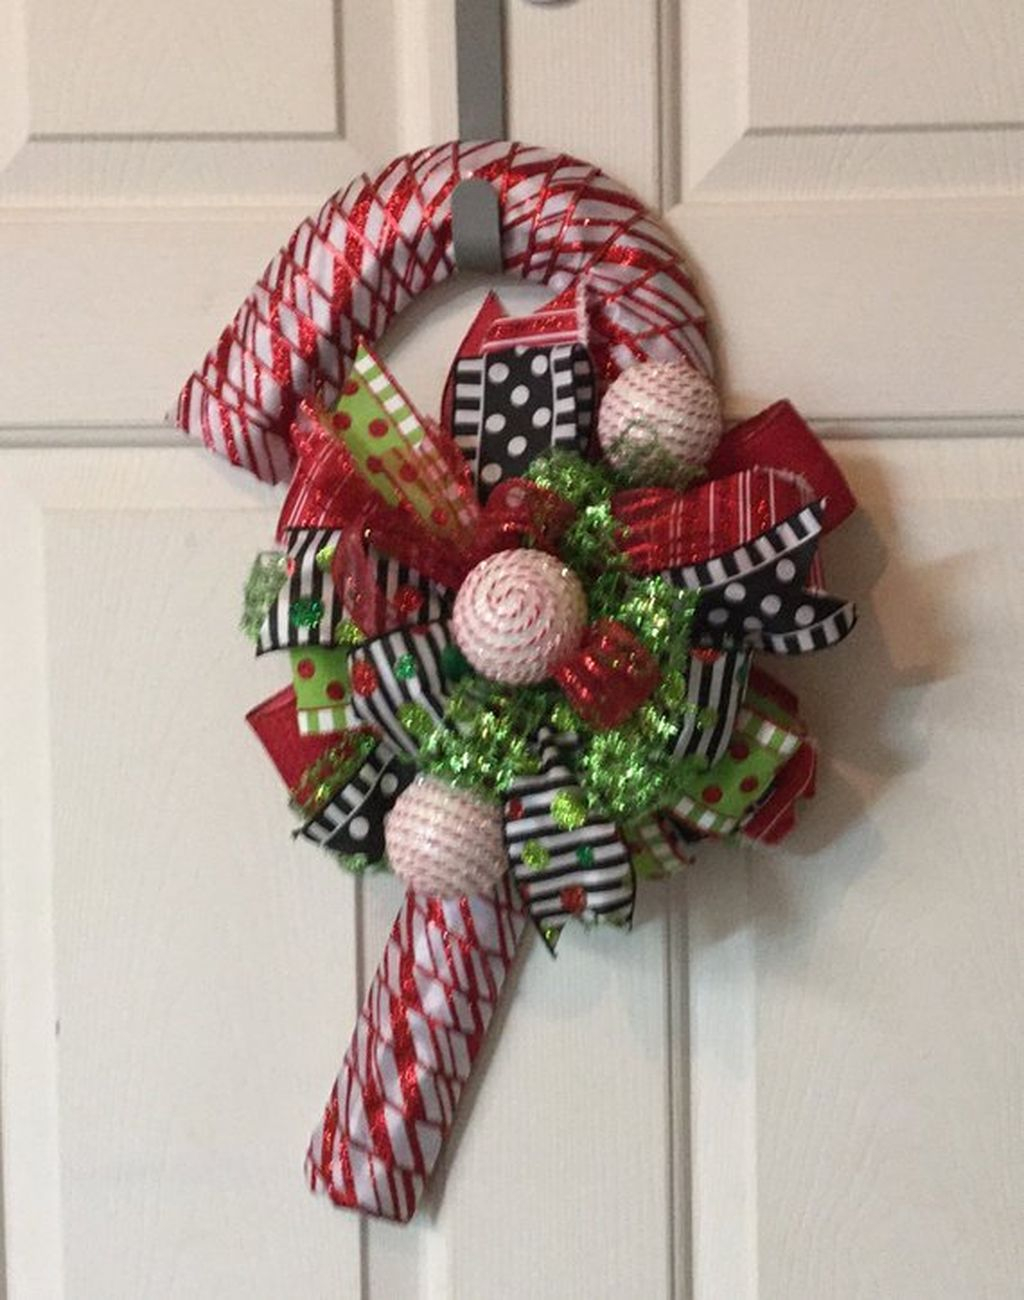 Perfect Candy Cane Christmas Decor Ideas For Your Home27